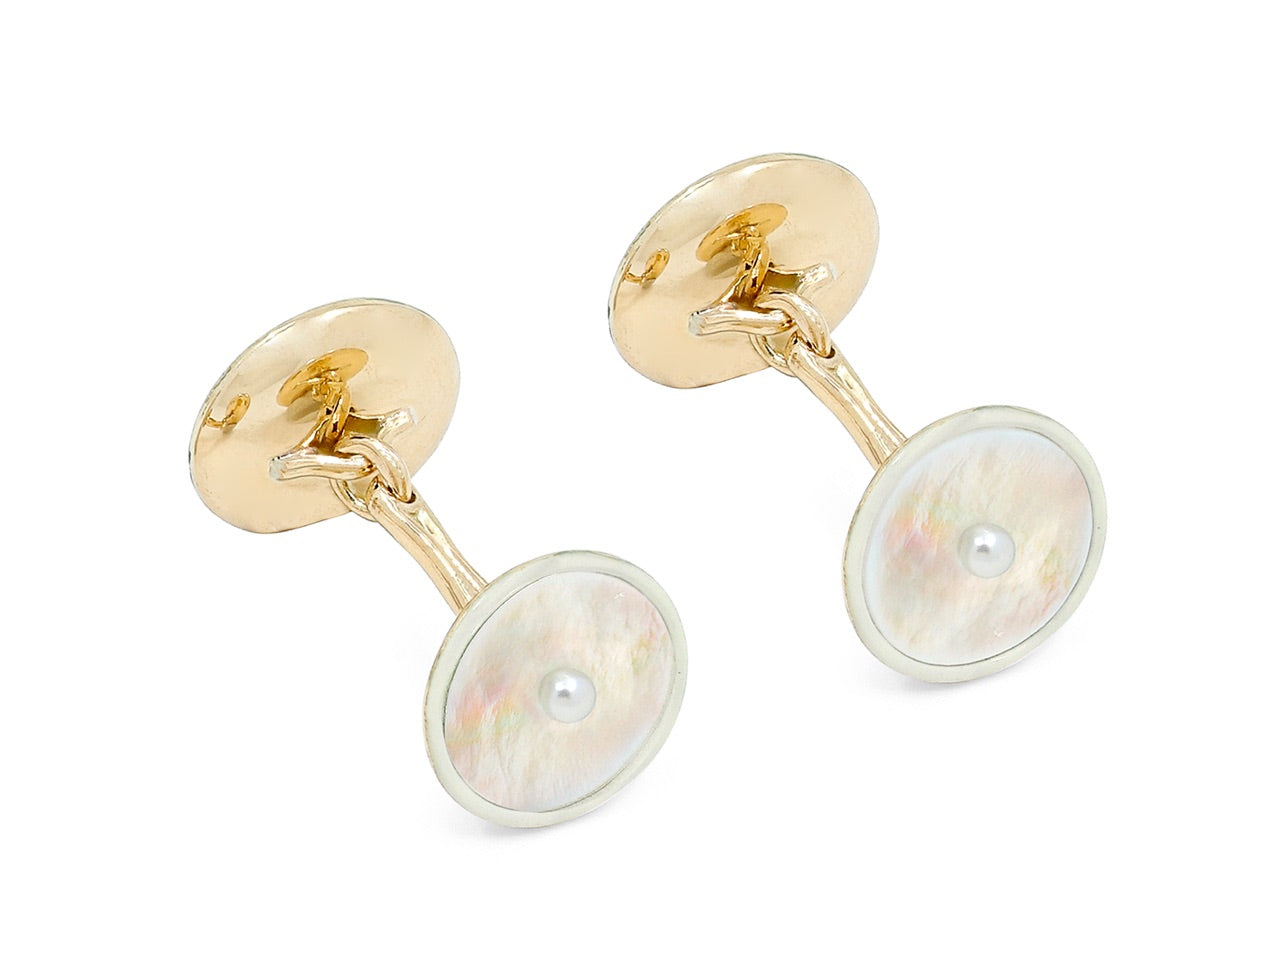 Mother-of-Pearl and White Enamel Men's Dress Set in 14K Gold